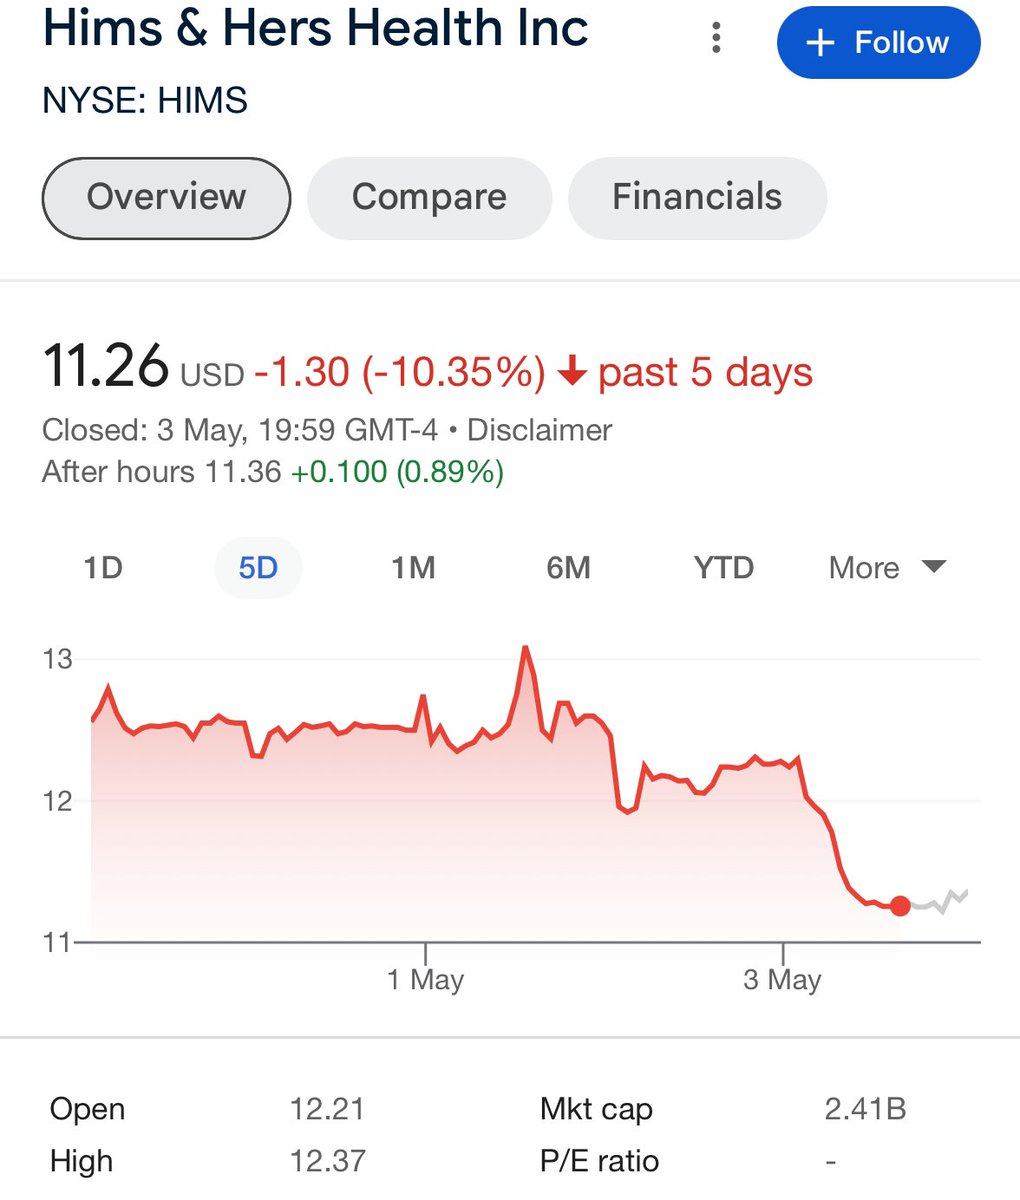 Company that offered to hire anti-Israel college students continues to see stocks plunge losing a staggering 10.35% value. 

Hims & Hers Health Inc tanked in the stock market, losing over $210 million, after Palestinian-American CEO Andrew Dudrum encouraged anti-Israel protesters…